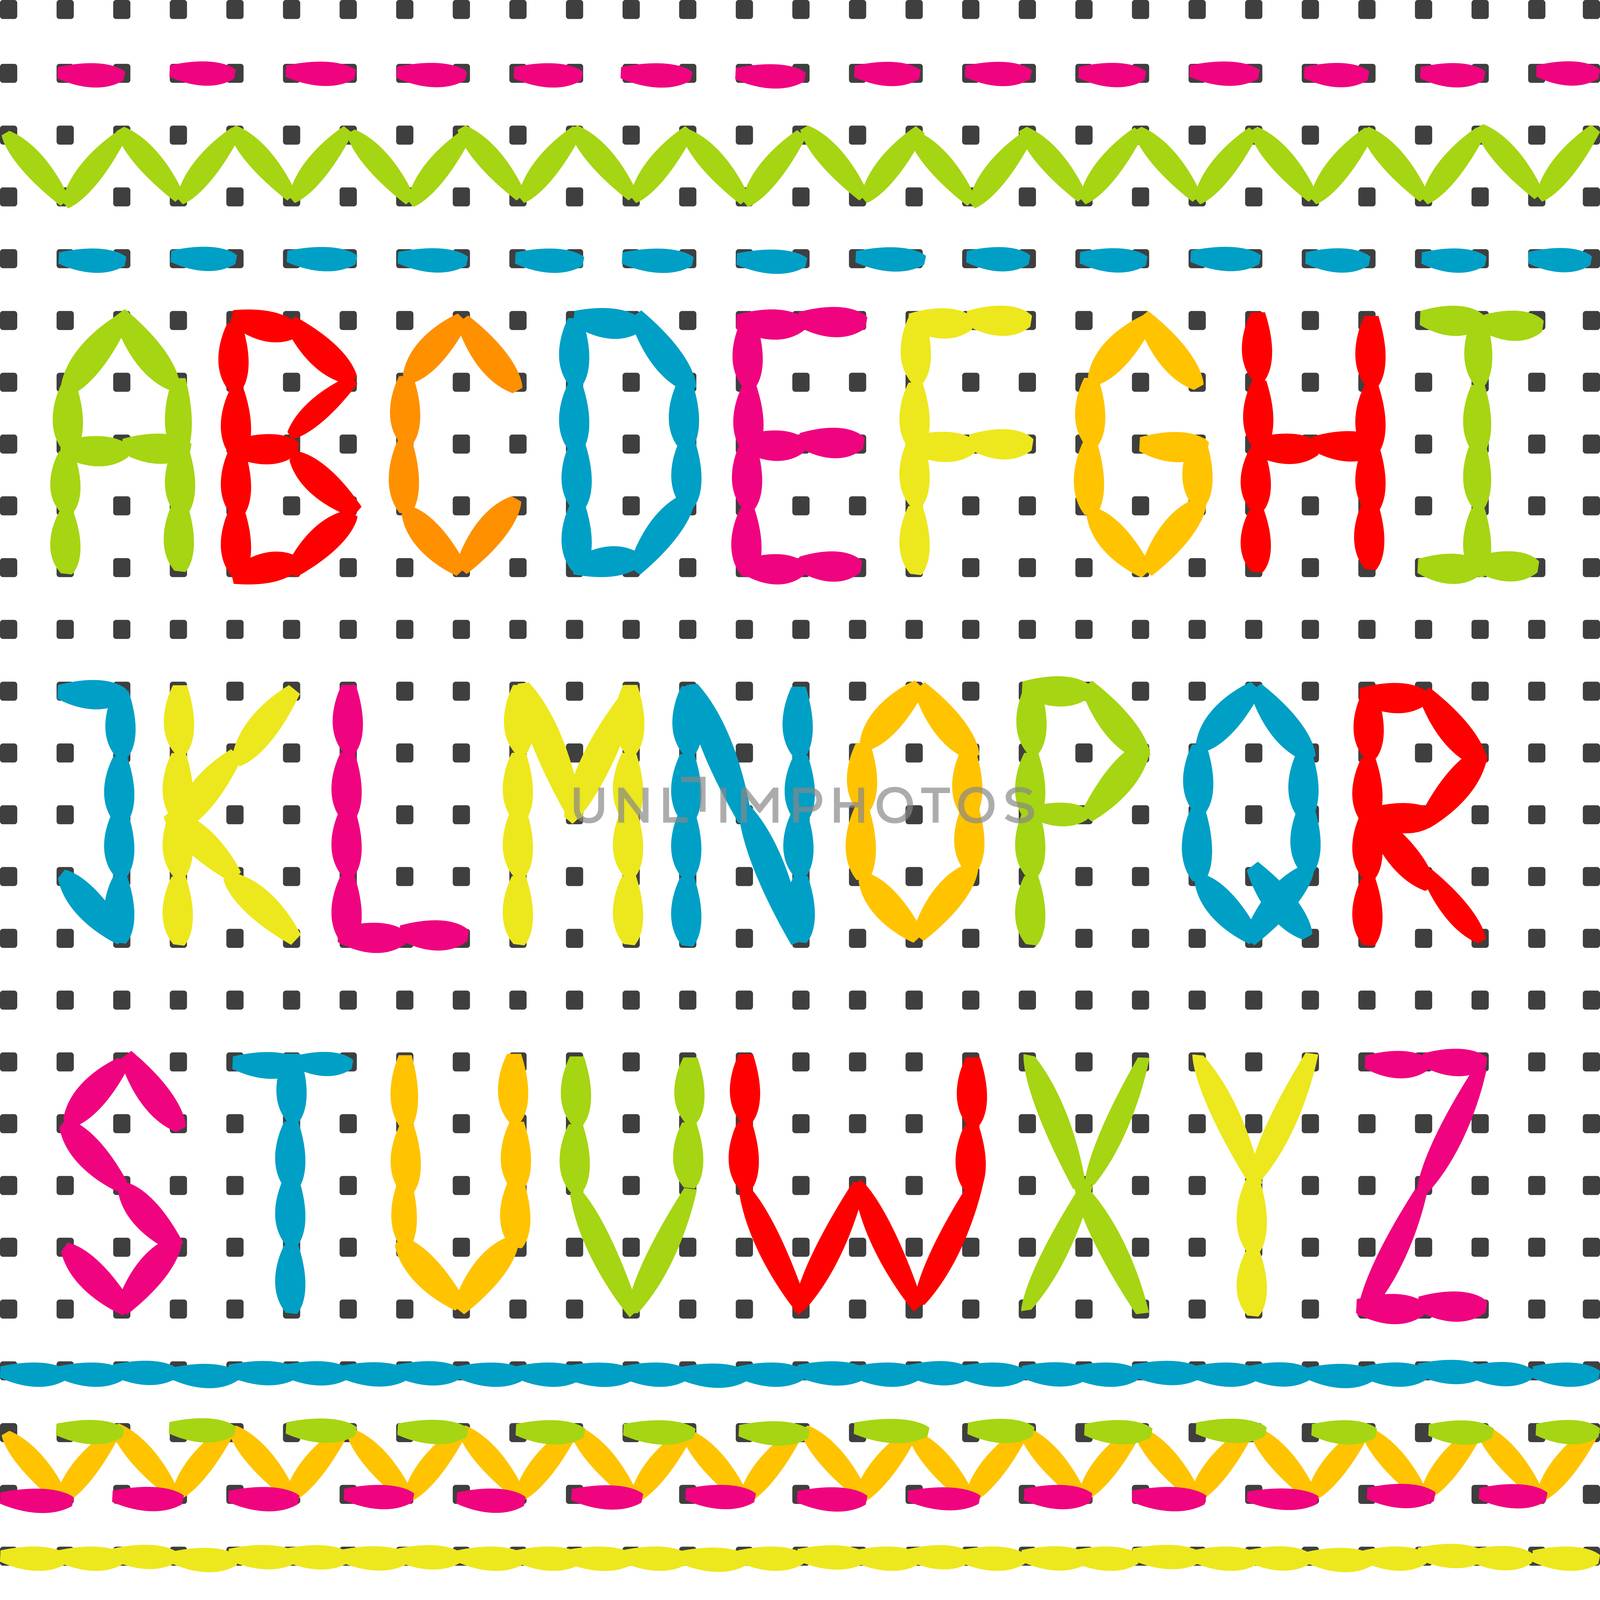 Embroidered alphabet and borders by hibrida13